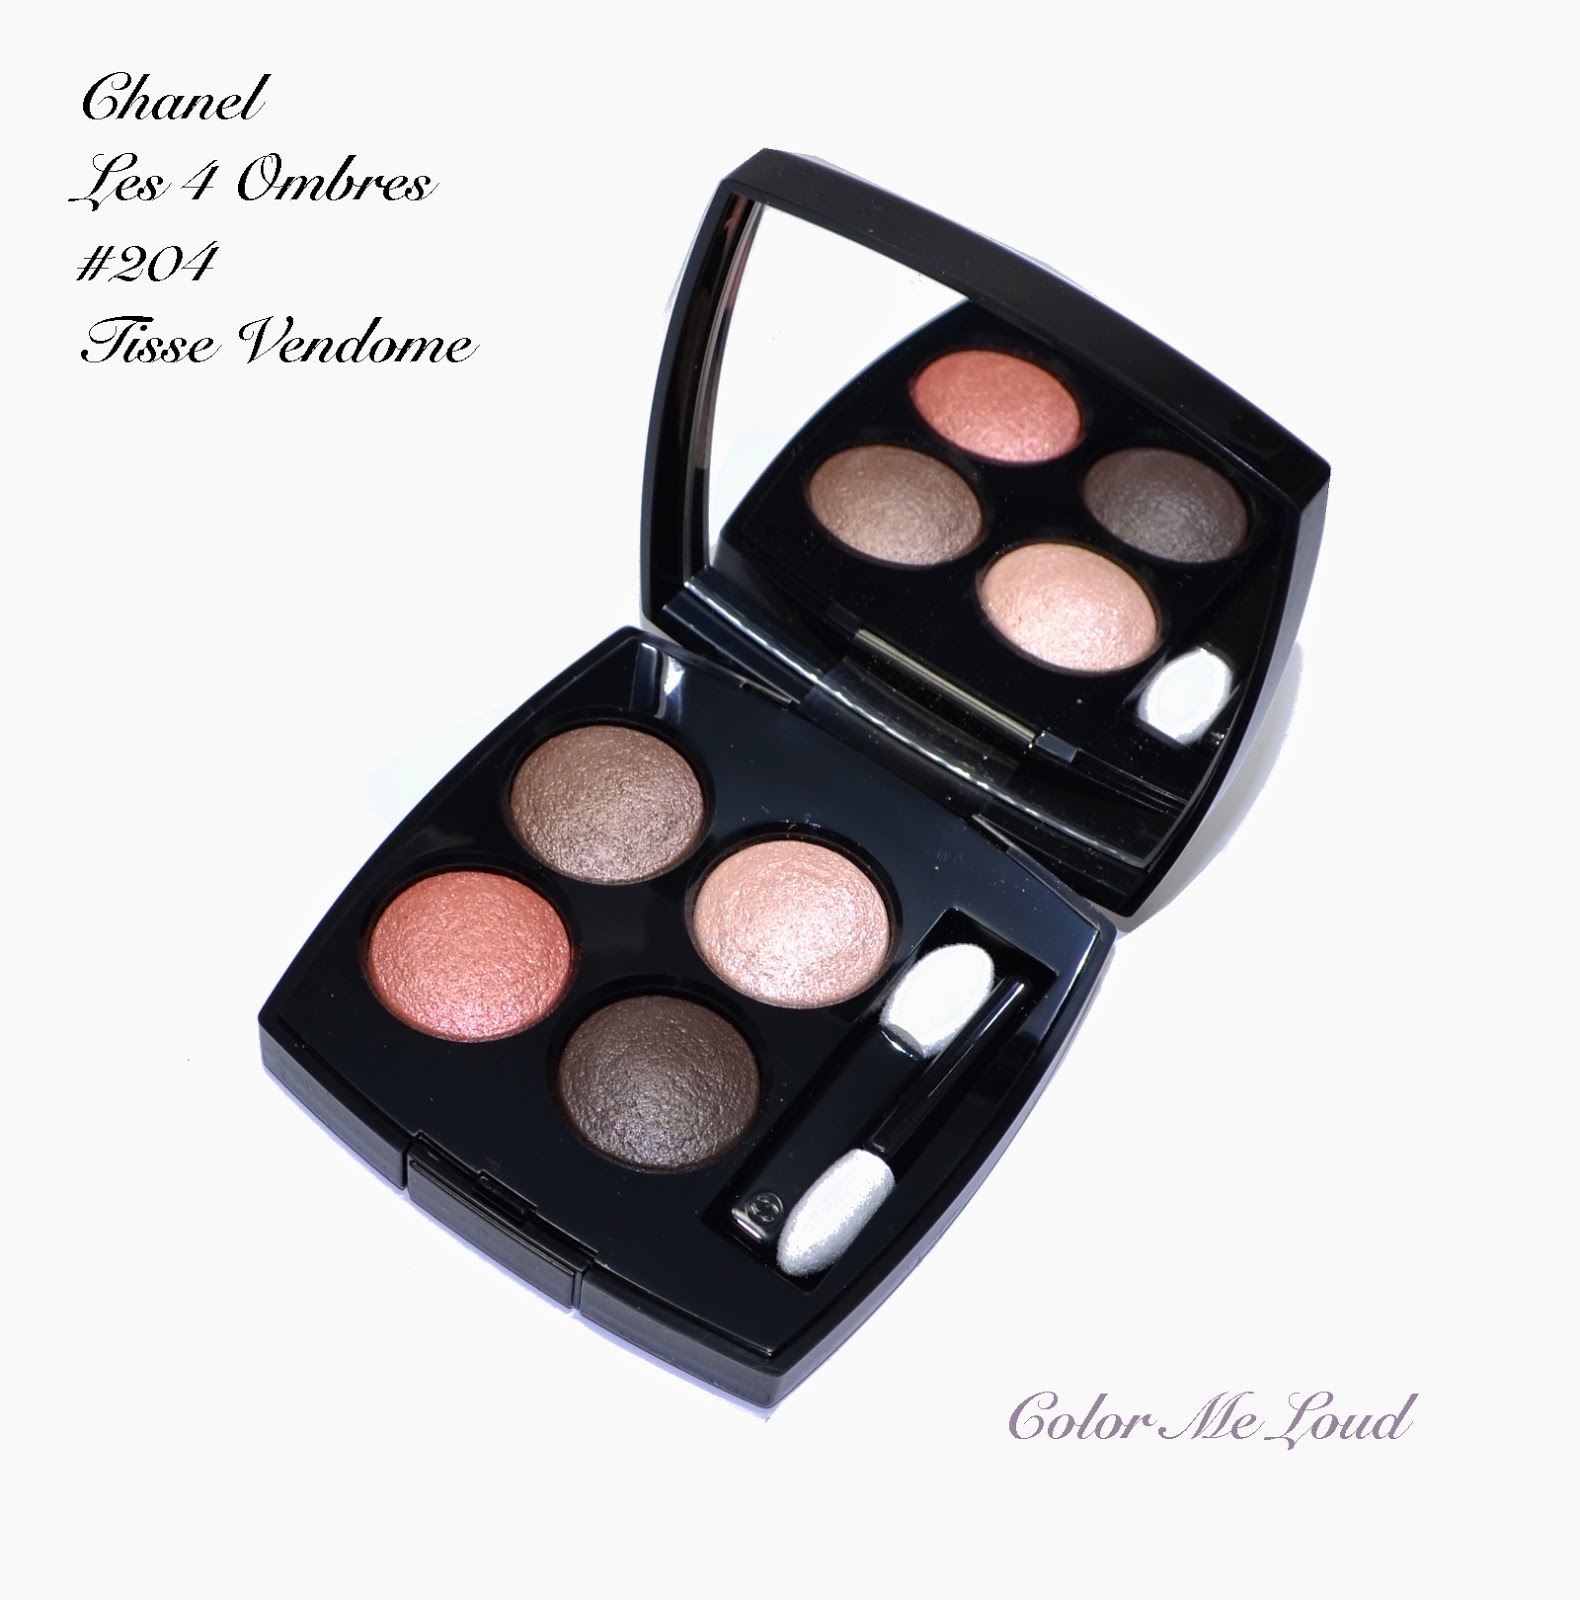 CHANEL · Les 4 Ombres Tweed Collection 2022